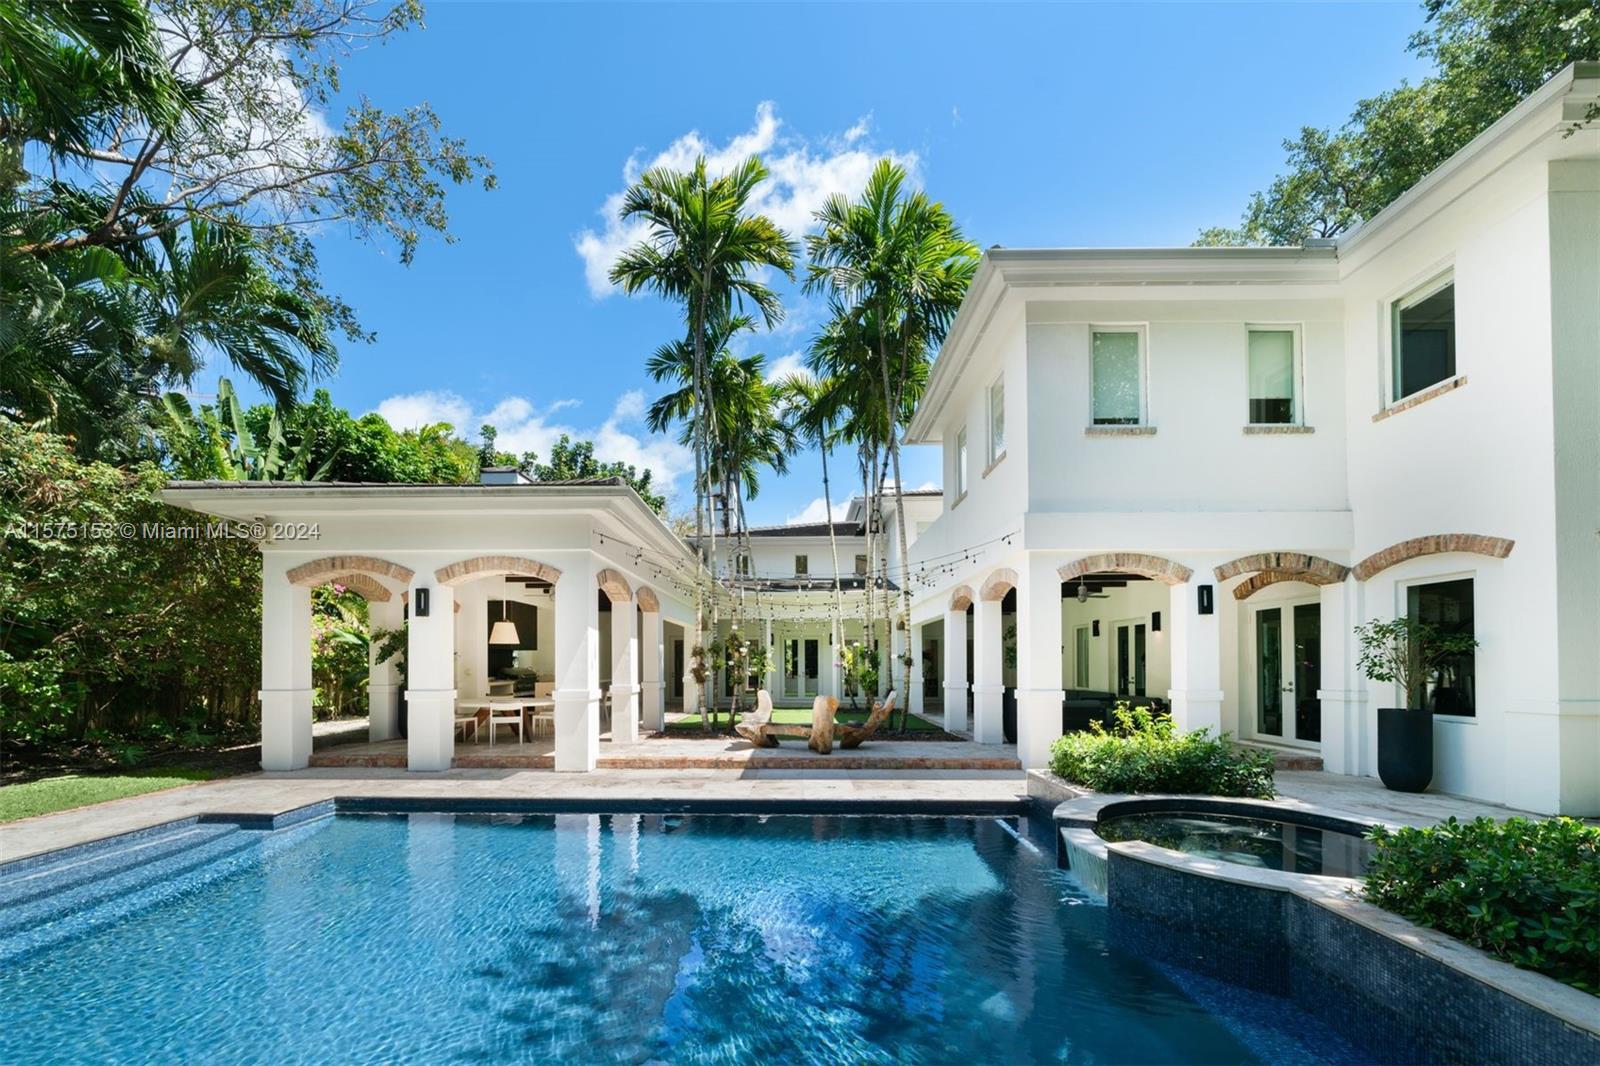 On a sprawling 20,000 SF gated lot in an exclusive, idyllic location just minutes away from Brickell, Key Biscayne, and Coconut Grove, this 8,881 SF, 6-BD, 6.5-BA residence offers a bright and airy ambiance, with abundant natural light cascading through volume ceilings. The chef’s kitchen includes an expansive center island, premium appliances, quartz countertops, and floor-to-ceiling custom cabinetry. French marble baths and hardwood floors throughout upstairs. Beautiful outdoor entertainment spaces feature a summer kitchen, heated pool/ jacuzzi, Travertine covered patios, and lush landscaping. Ample parking is provided by a 4-car garage with car lift, and Chicago brick driveway. Additional features include a wine cellar, impact windows and doors, and interior/exterior audio system.